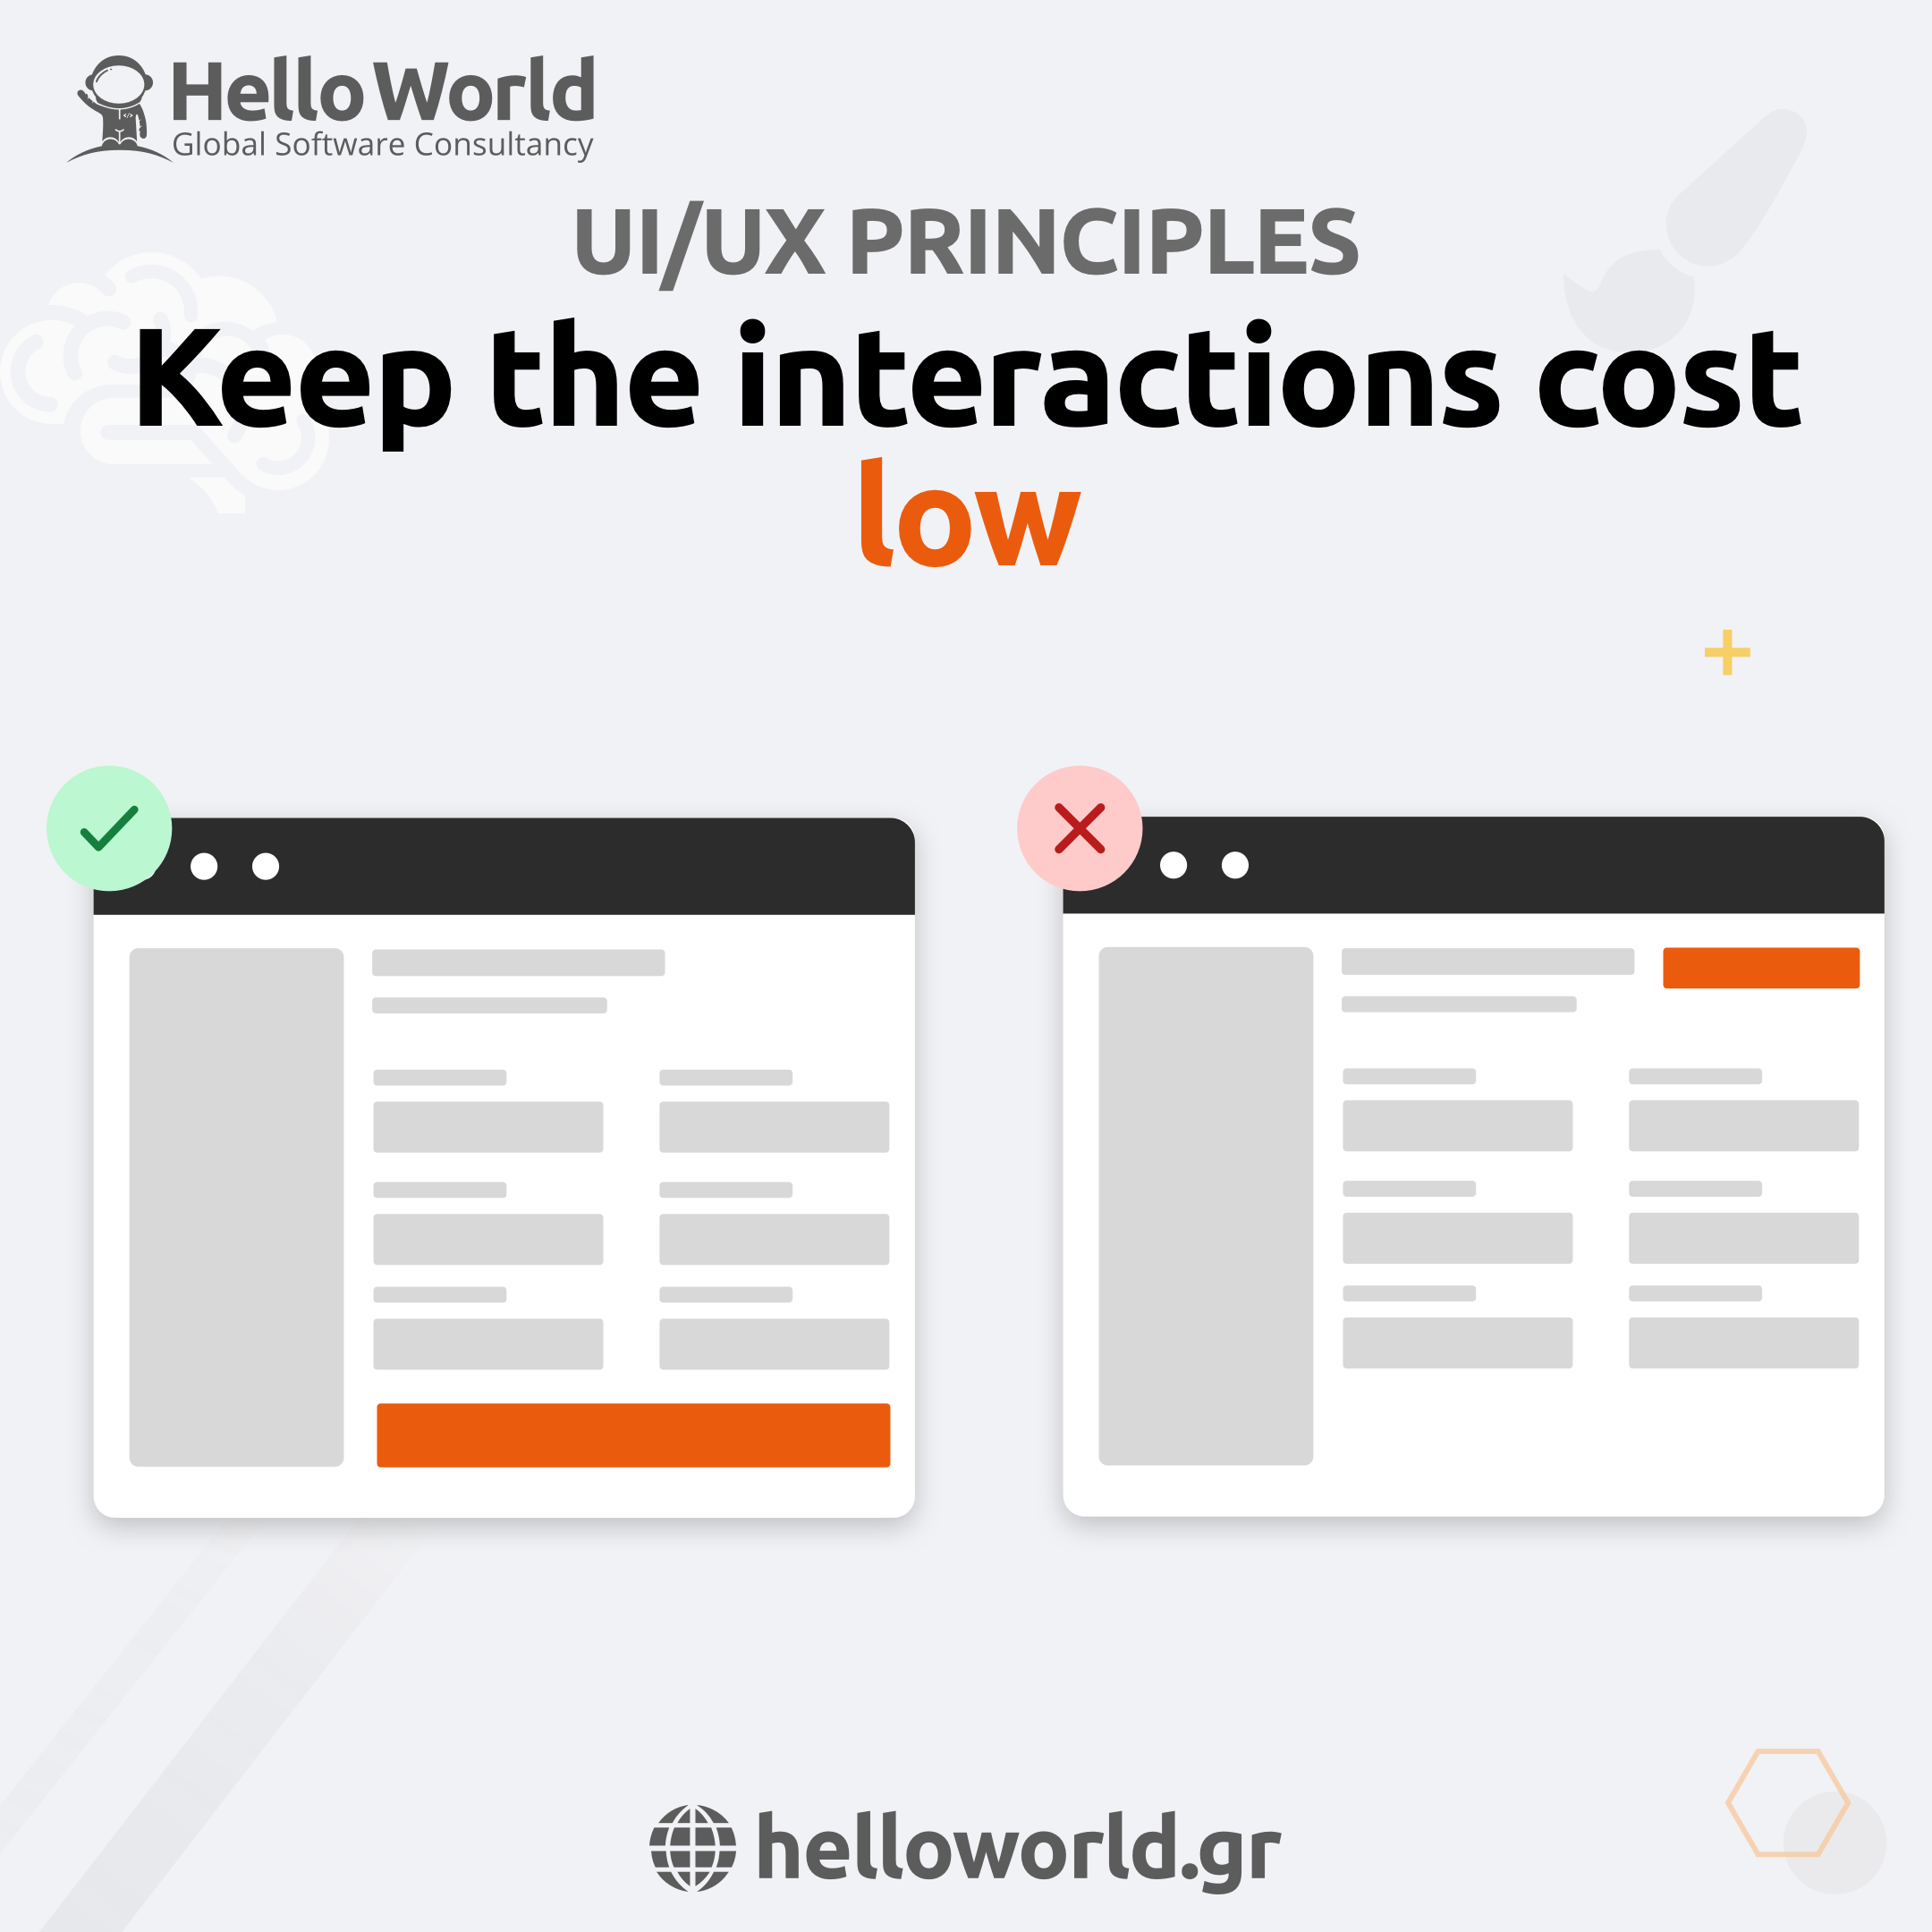 Keep the interactions cost low